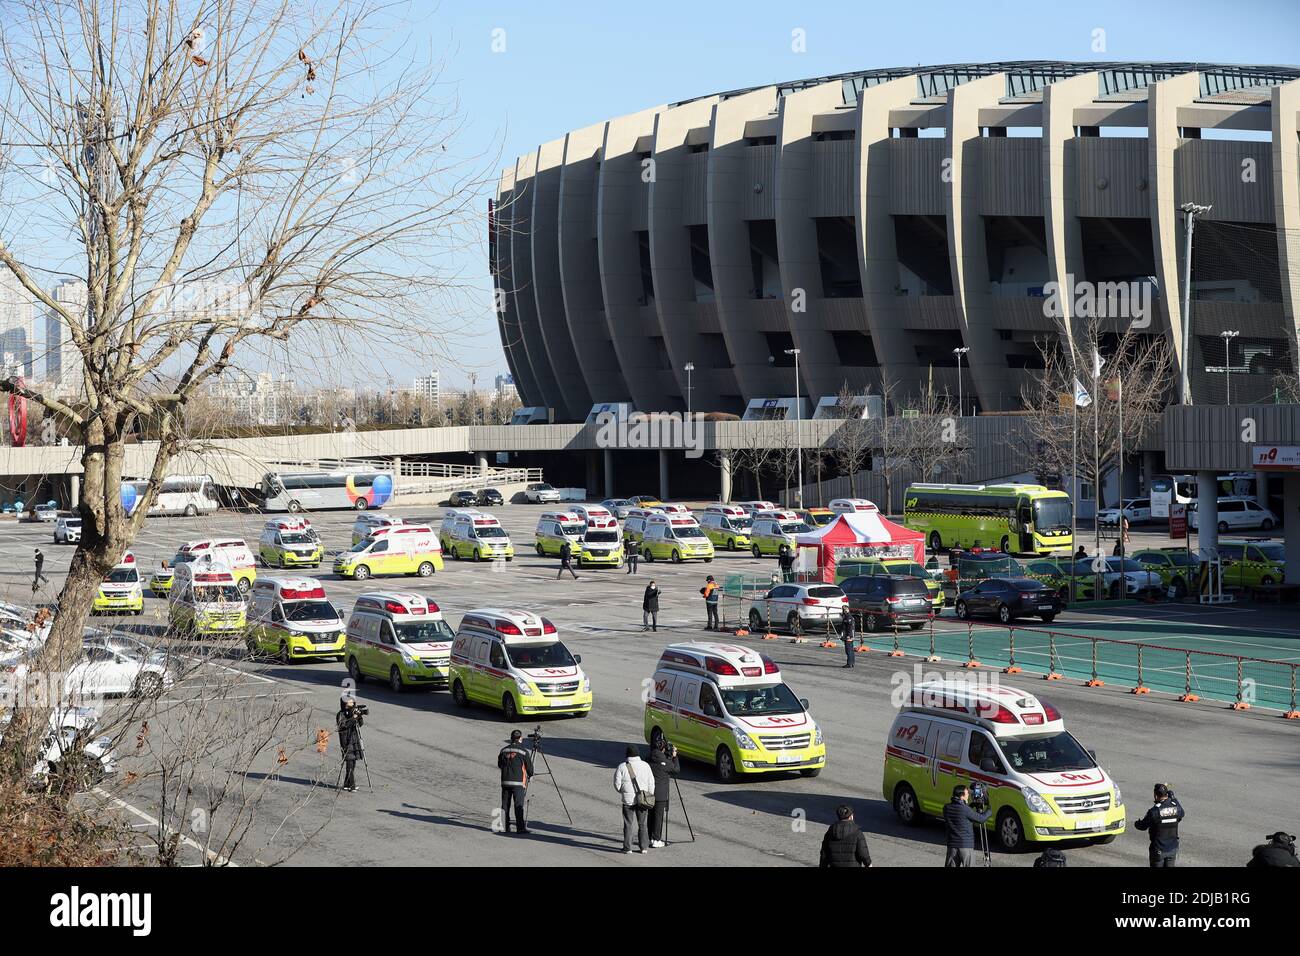 (201214) -- SEOUL, Dec. 14, 2020 (Xinhua) -- Ambulances set off to transfer confirmed cases and suspected patients near the Jamsil Sports Complex in Songpa-gu of Seoul, South Korea, Dec. 14, 2020. In the latest tally, South Korea reported 718 more cases of COVID-19 for the past 24 hours, raising the total number of infections to 43,484.   It was lower than the country's highest daily caseload of 1,030 tallied on Sunday, but the reading stayed above 100 for 37 days since Nov. 8. (NEWSIS/Handout via Xinhua) Stock Photo